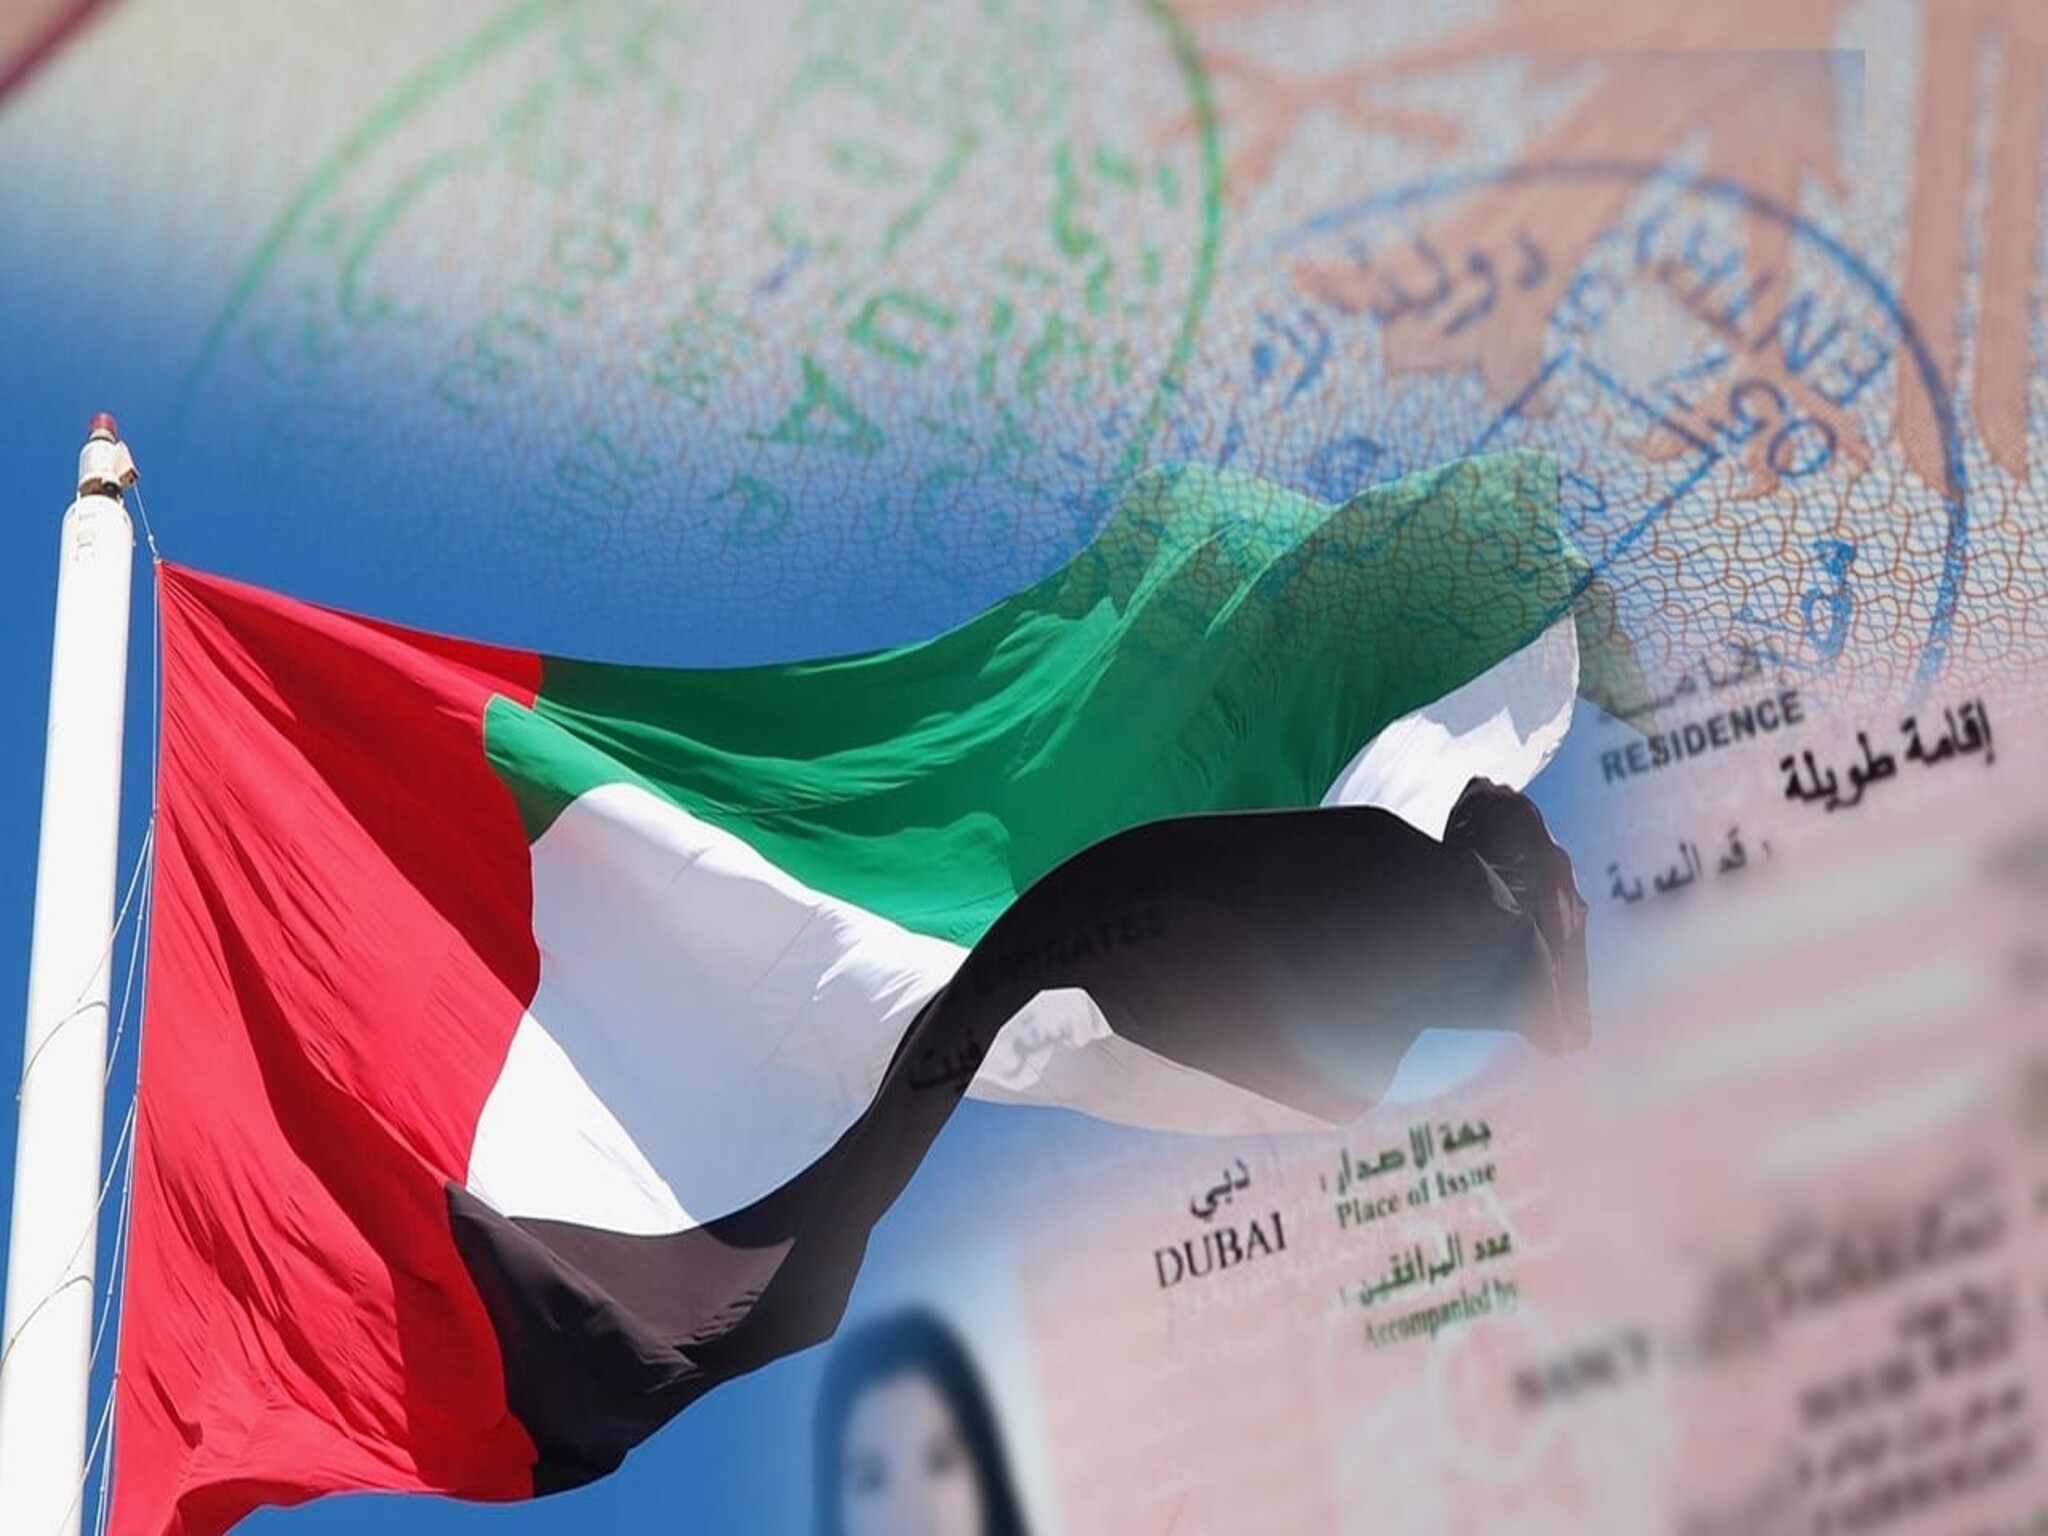 The UAE grants some travelers a pre-approved visa upon arrival, with conditions